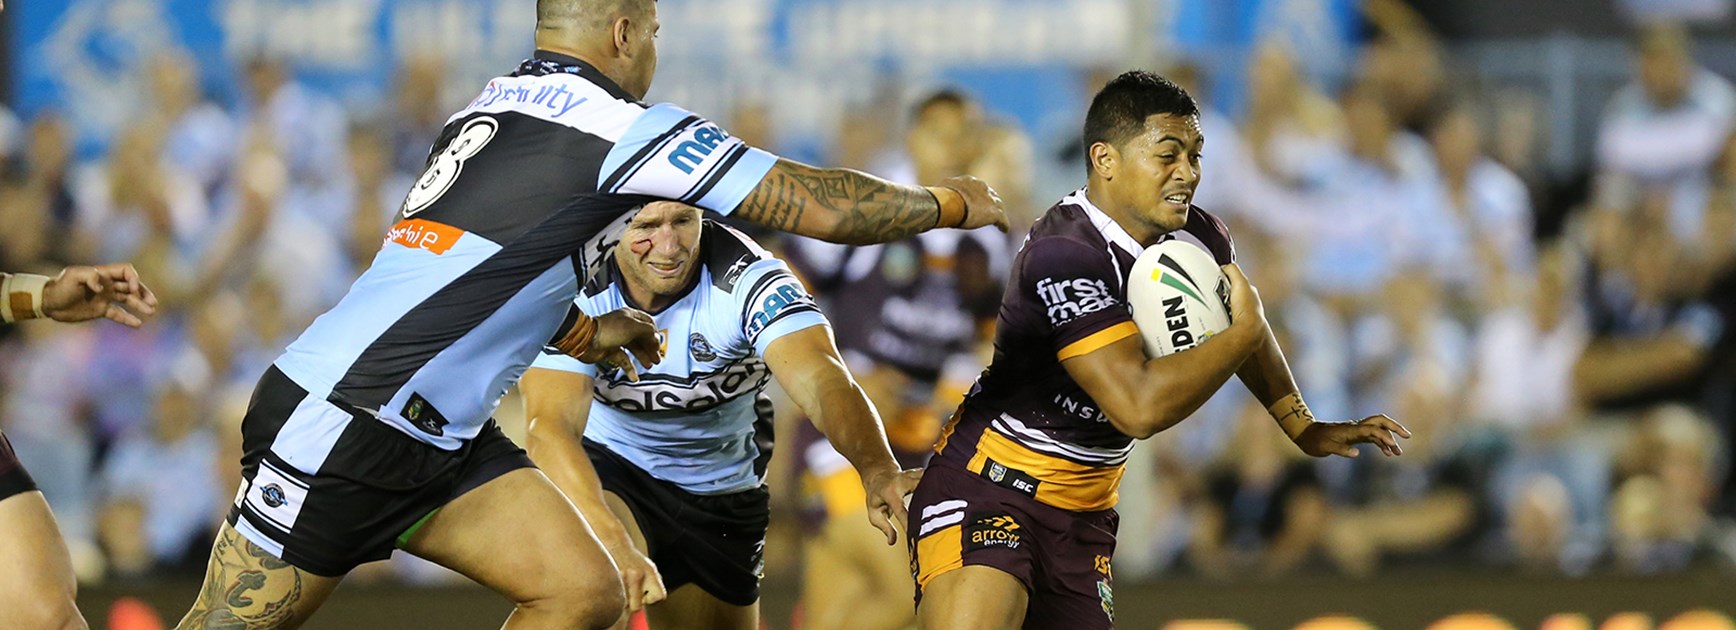 Broncos five-eighth Anthony Milford makes a break against the Sharks in Round 1 of the Telstra Premiership.